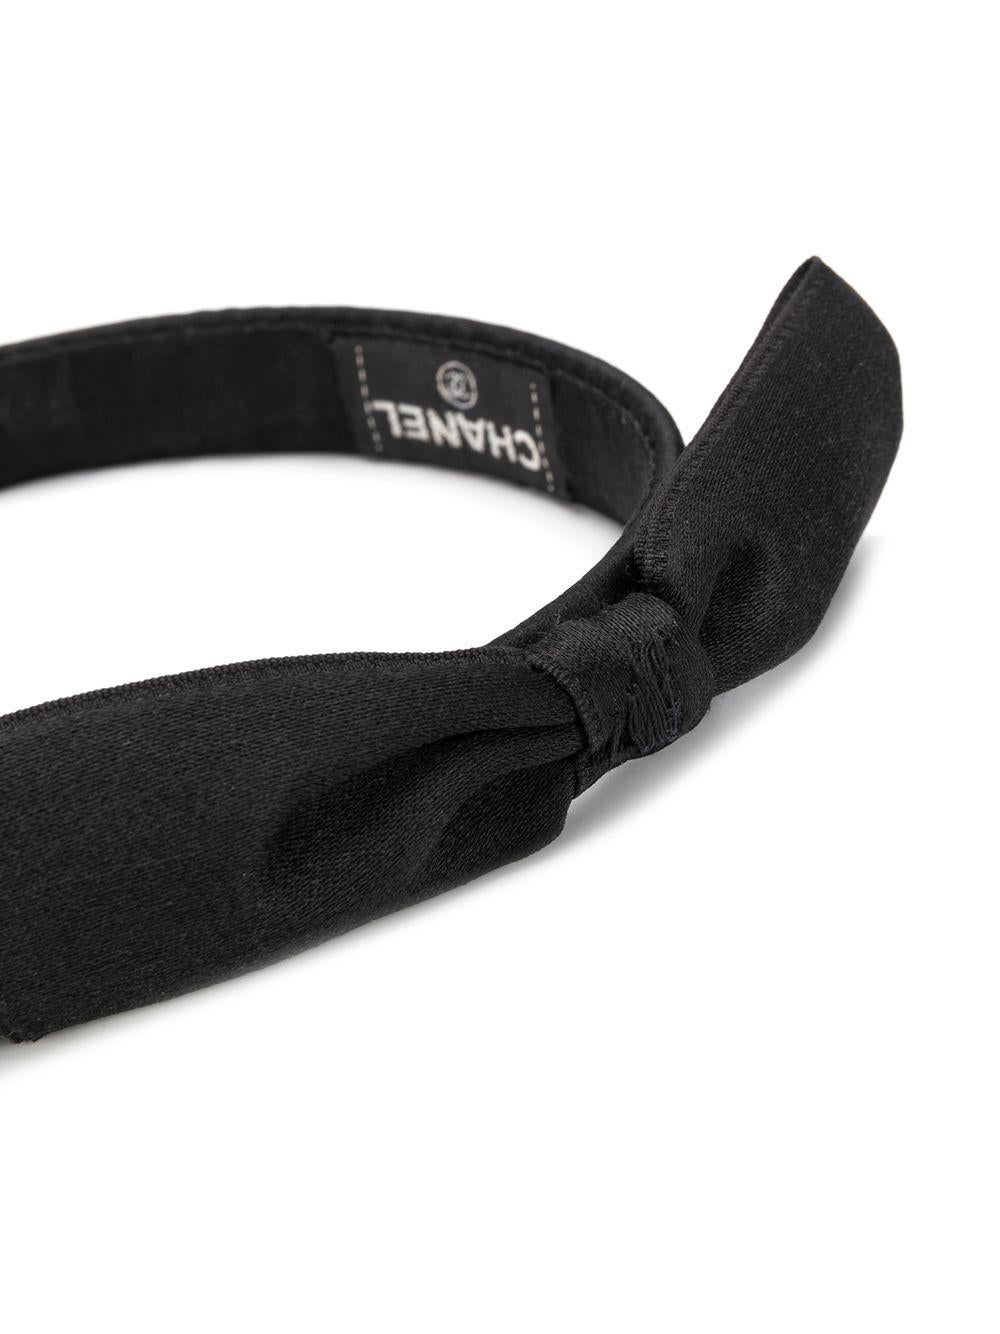 Add a youthful, preppy vibe to your look with this pre-owned black silk headband from Chanel. Crafted in France, this elegant accessory boasts a slim, round shape, an internal logo patch and a distinctive bow embellishment with frayed edges for an